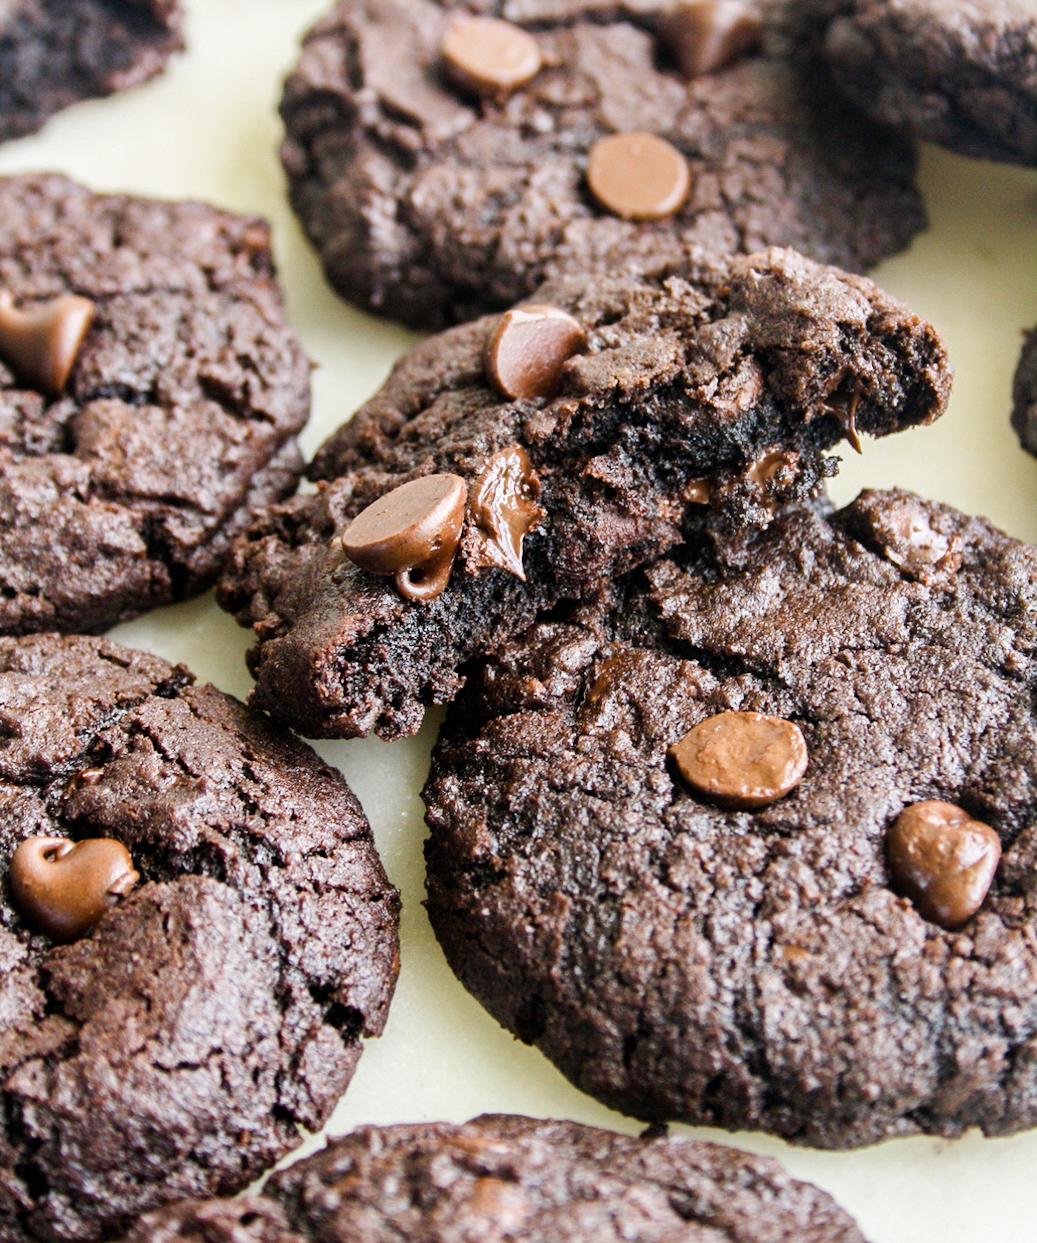 Rich, fudgy cookies with Dutch cocoa and chocolate chips!